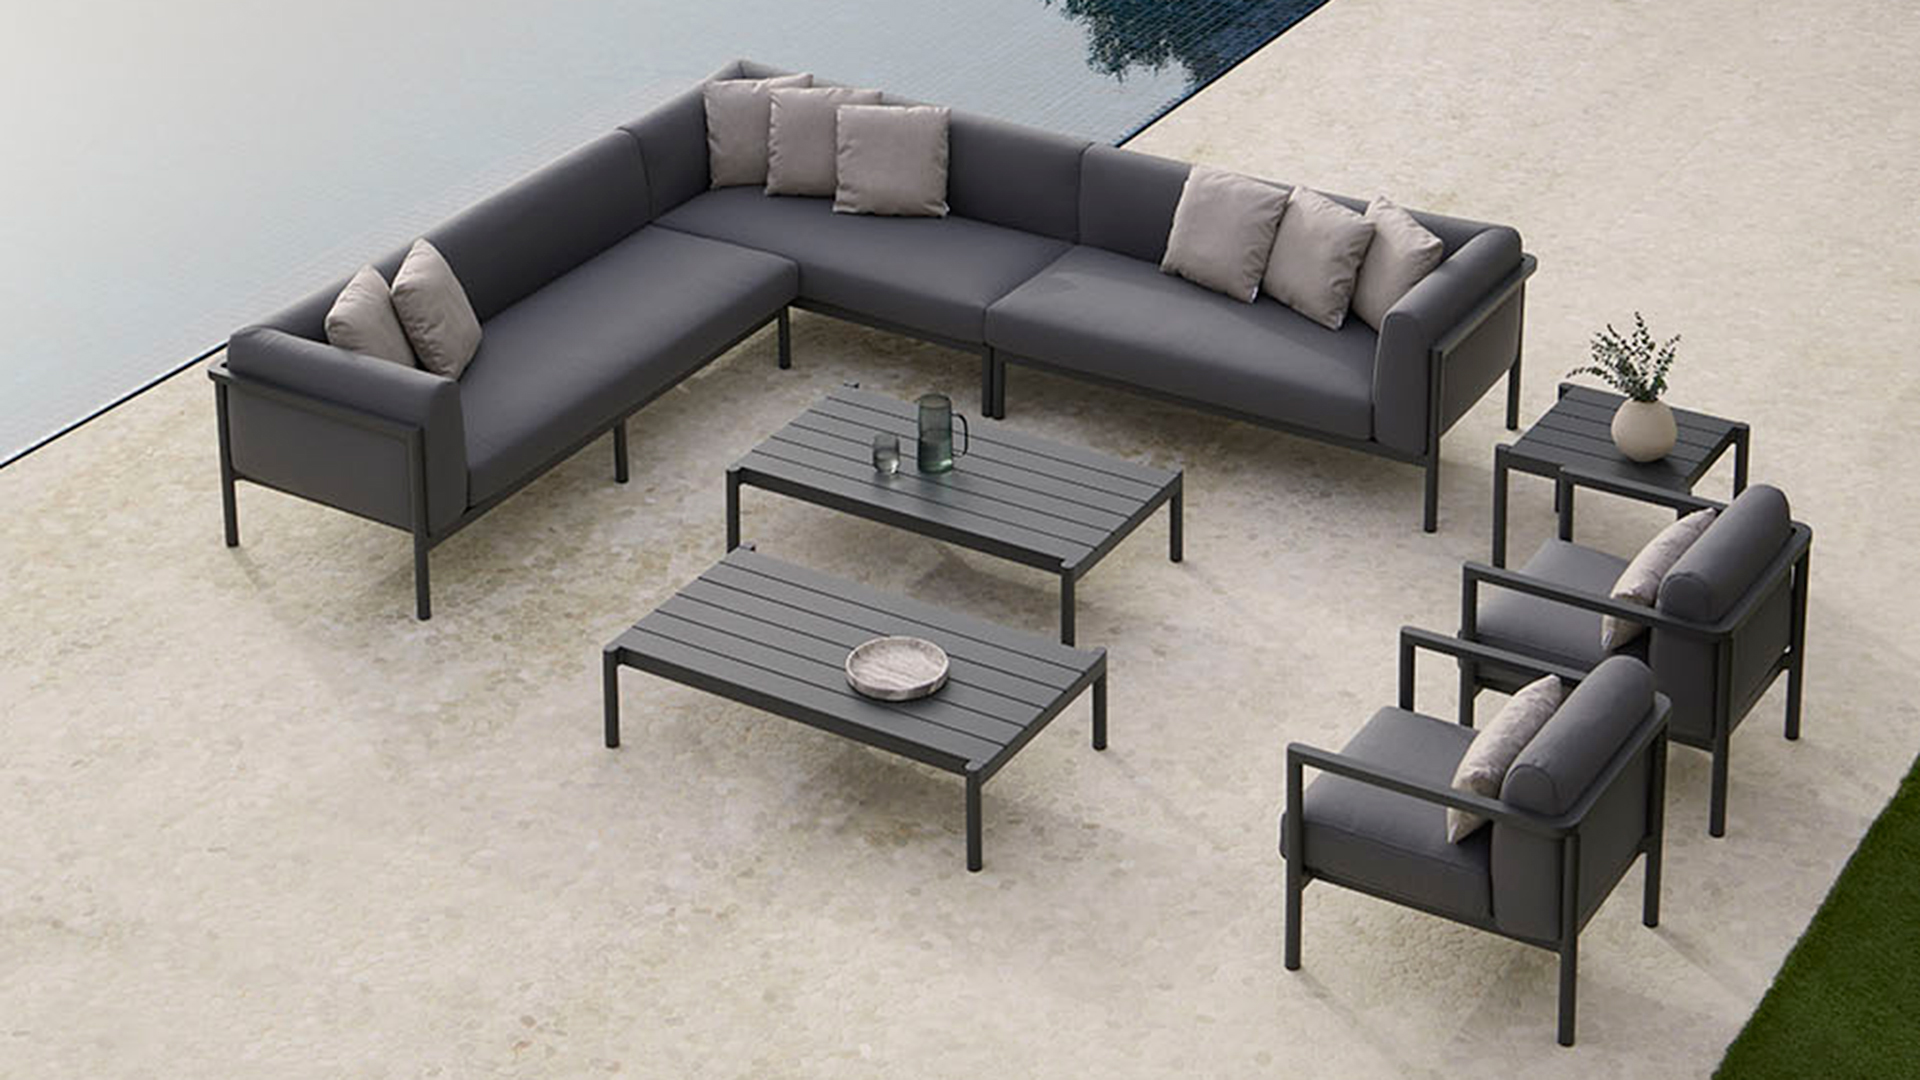 Habitat Valencia. Discover our new outdoor living pieces at Pavilion N3 - P2 | Stand C9